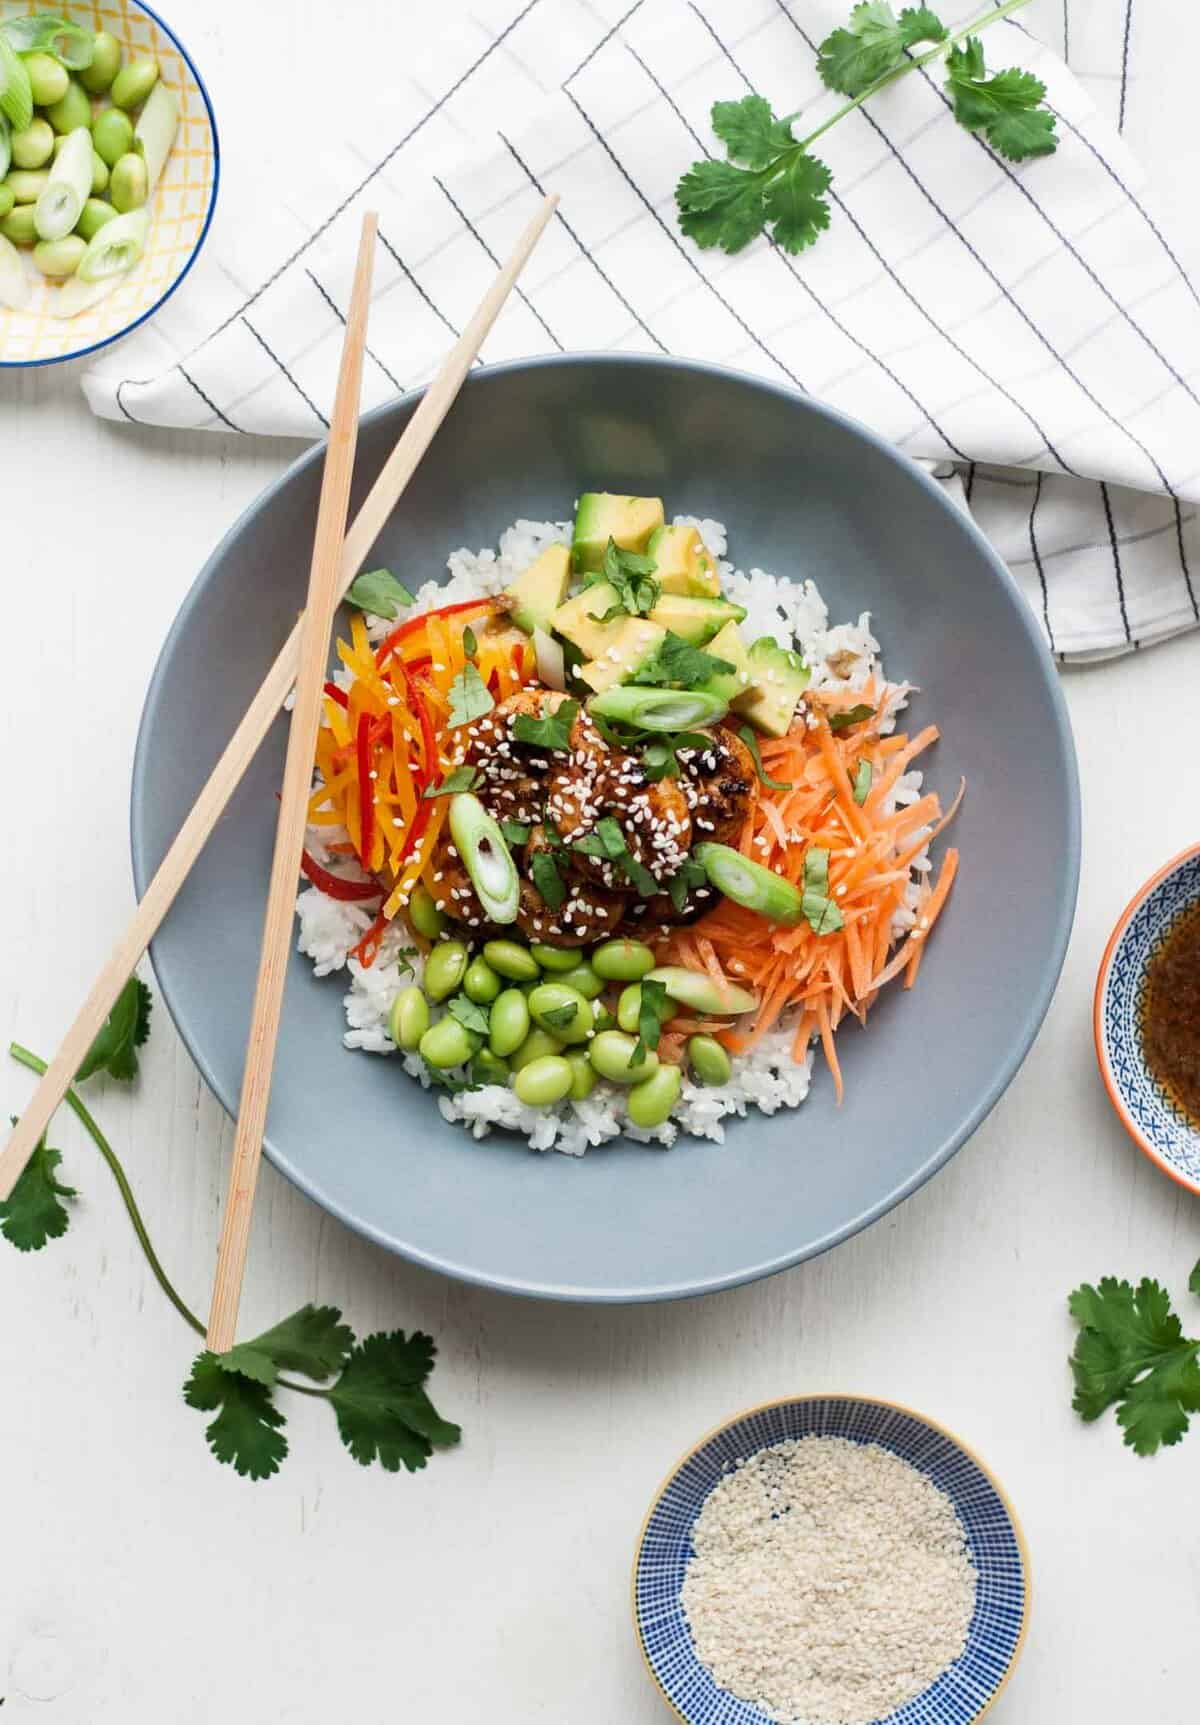 Sticky Rice Salad with Spicy Prawns - this simple recipe combines sticky sushi rice, fresh veggies and spicy prawns for a healthy and flavoursome lunch dish! | eatloveeats.com